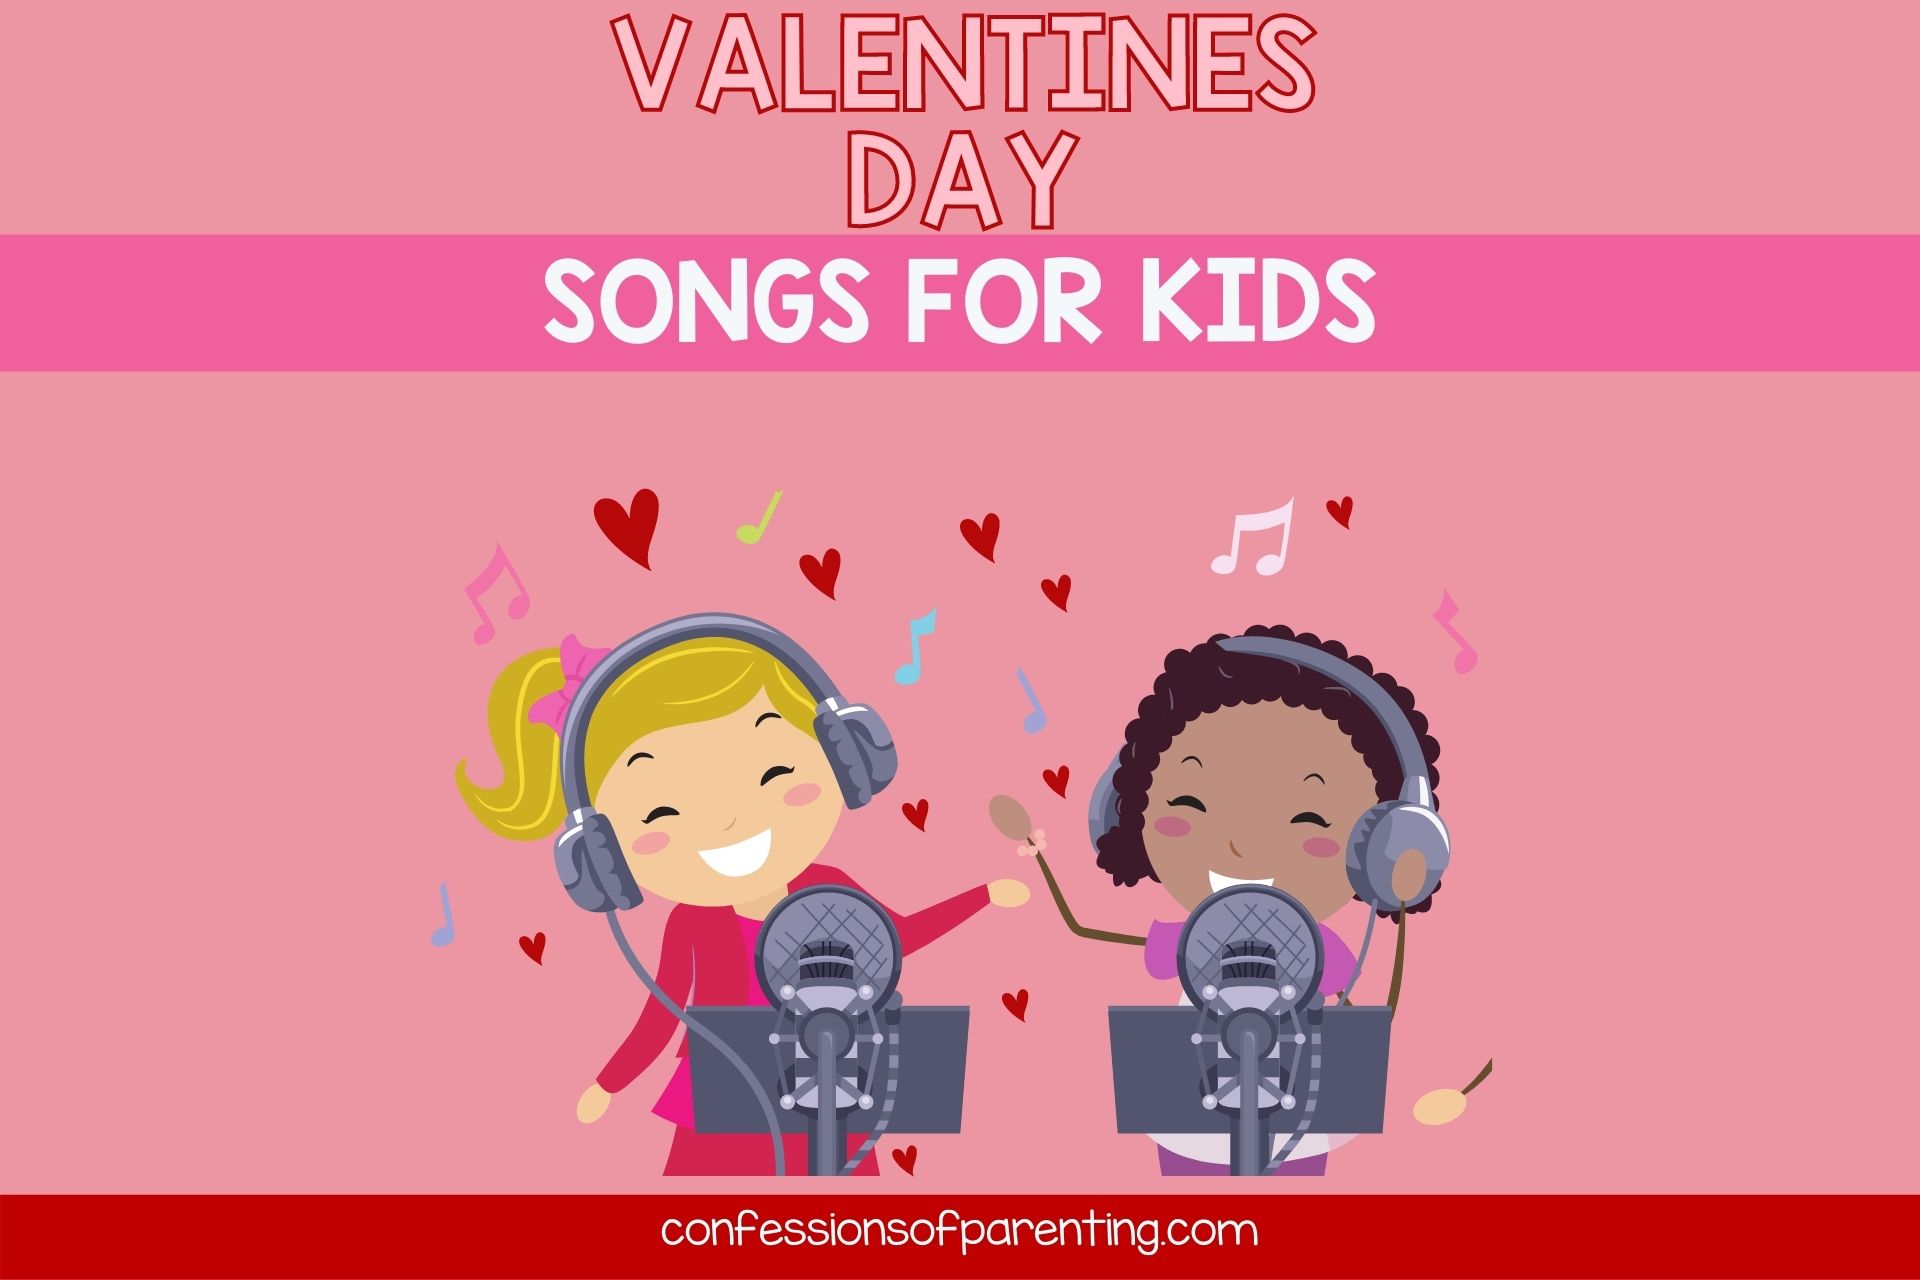 featured image: valentines day songs for kids with an image of 2 kids singing